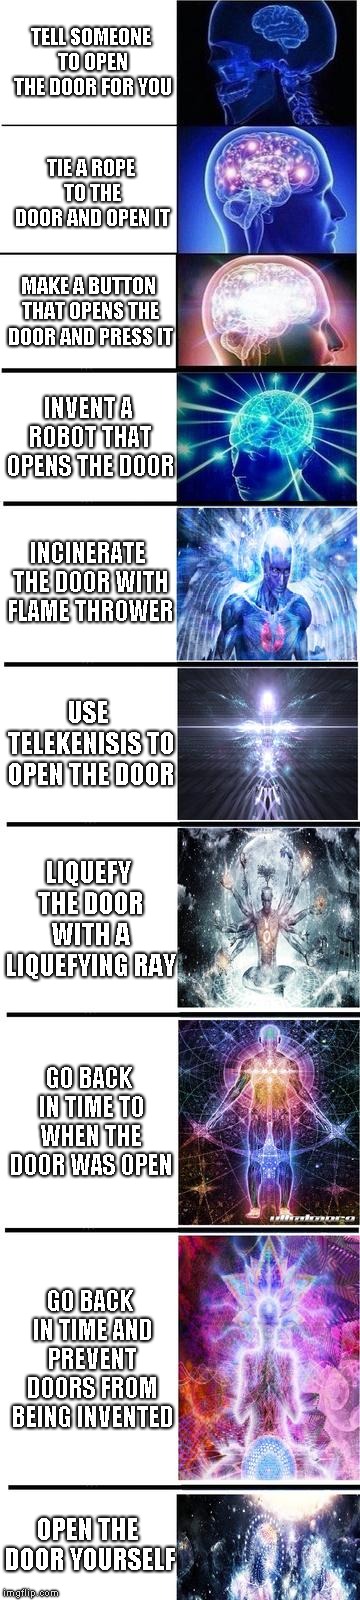 expanding brain | TELL SOMEONE TO OPEN THE DOOR FOR YOU; TIE A ROPE TO THE DOOR AND OPEN IT; MAKE A BUTTON THAT OPENS THE DOOR AND PRESS IT; INVENT A ROBOT THAT OPENS THE DOOR; INCINERATE THE DOOR WITH FLAME THROWER; USE TELEKENISIS TO OPEN THE DOOR; LIQUEFY THE DOOR WITH A LIQUEFYING RAY; GO BACK IN TIME TO WHEN THE DOOR WAS OPEN; GO BACK IN TIME AND PREVENT DOORS FROM BEING INVENTED; OPEN THE DOOR YOURSELF | image tagged in expanding brain,memes | made w/ Imgflip meme maker